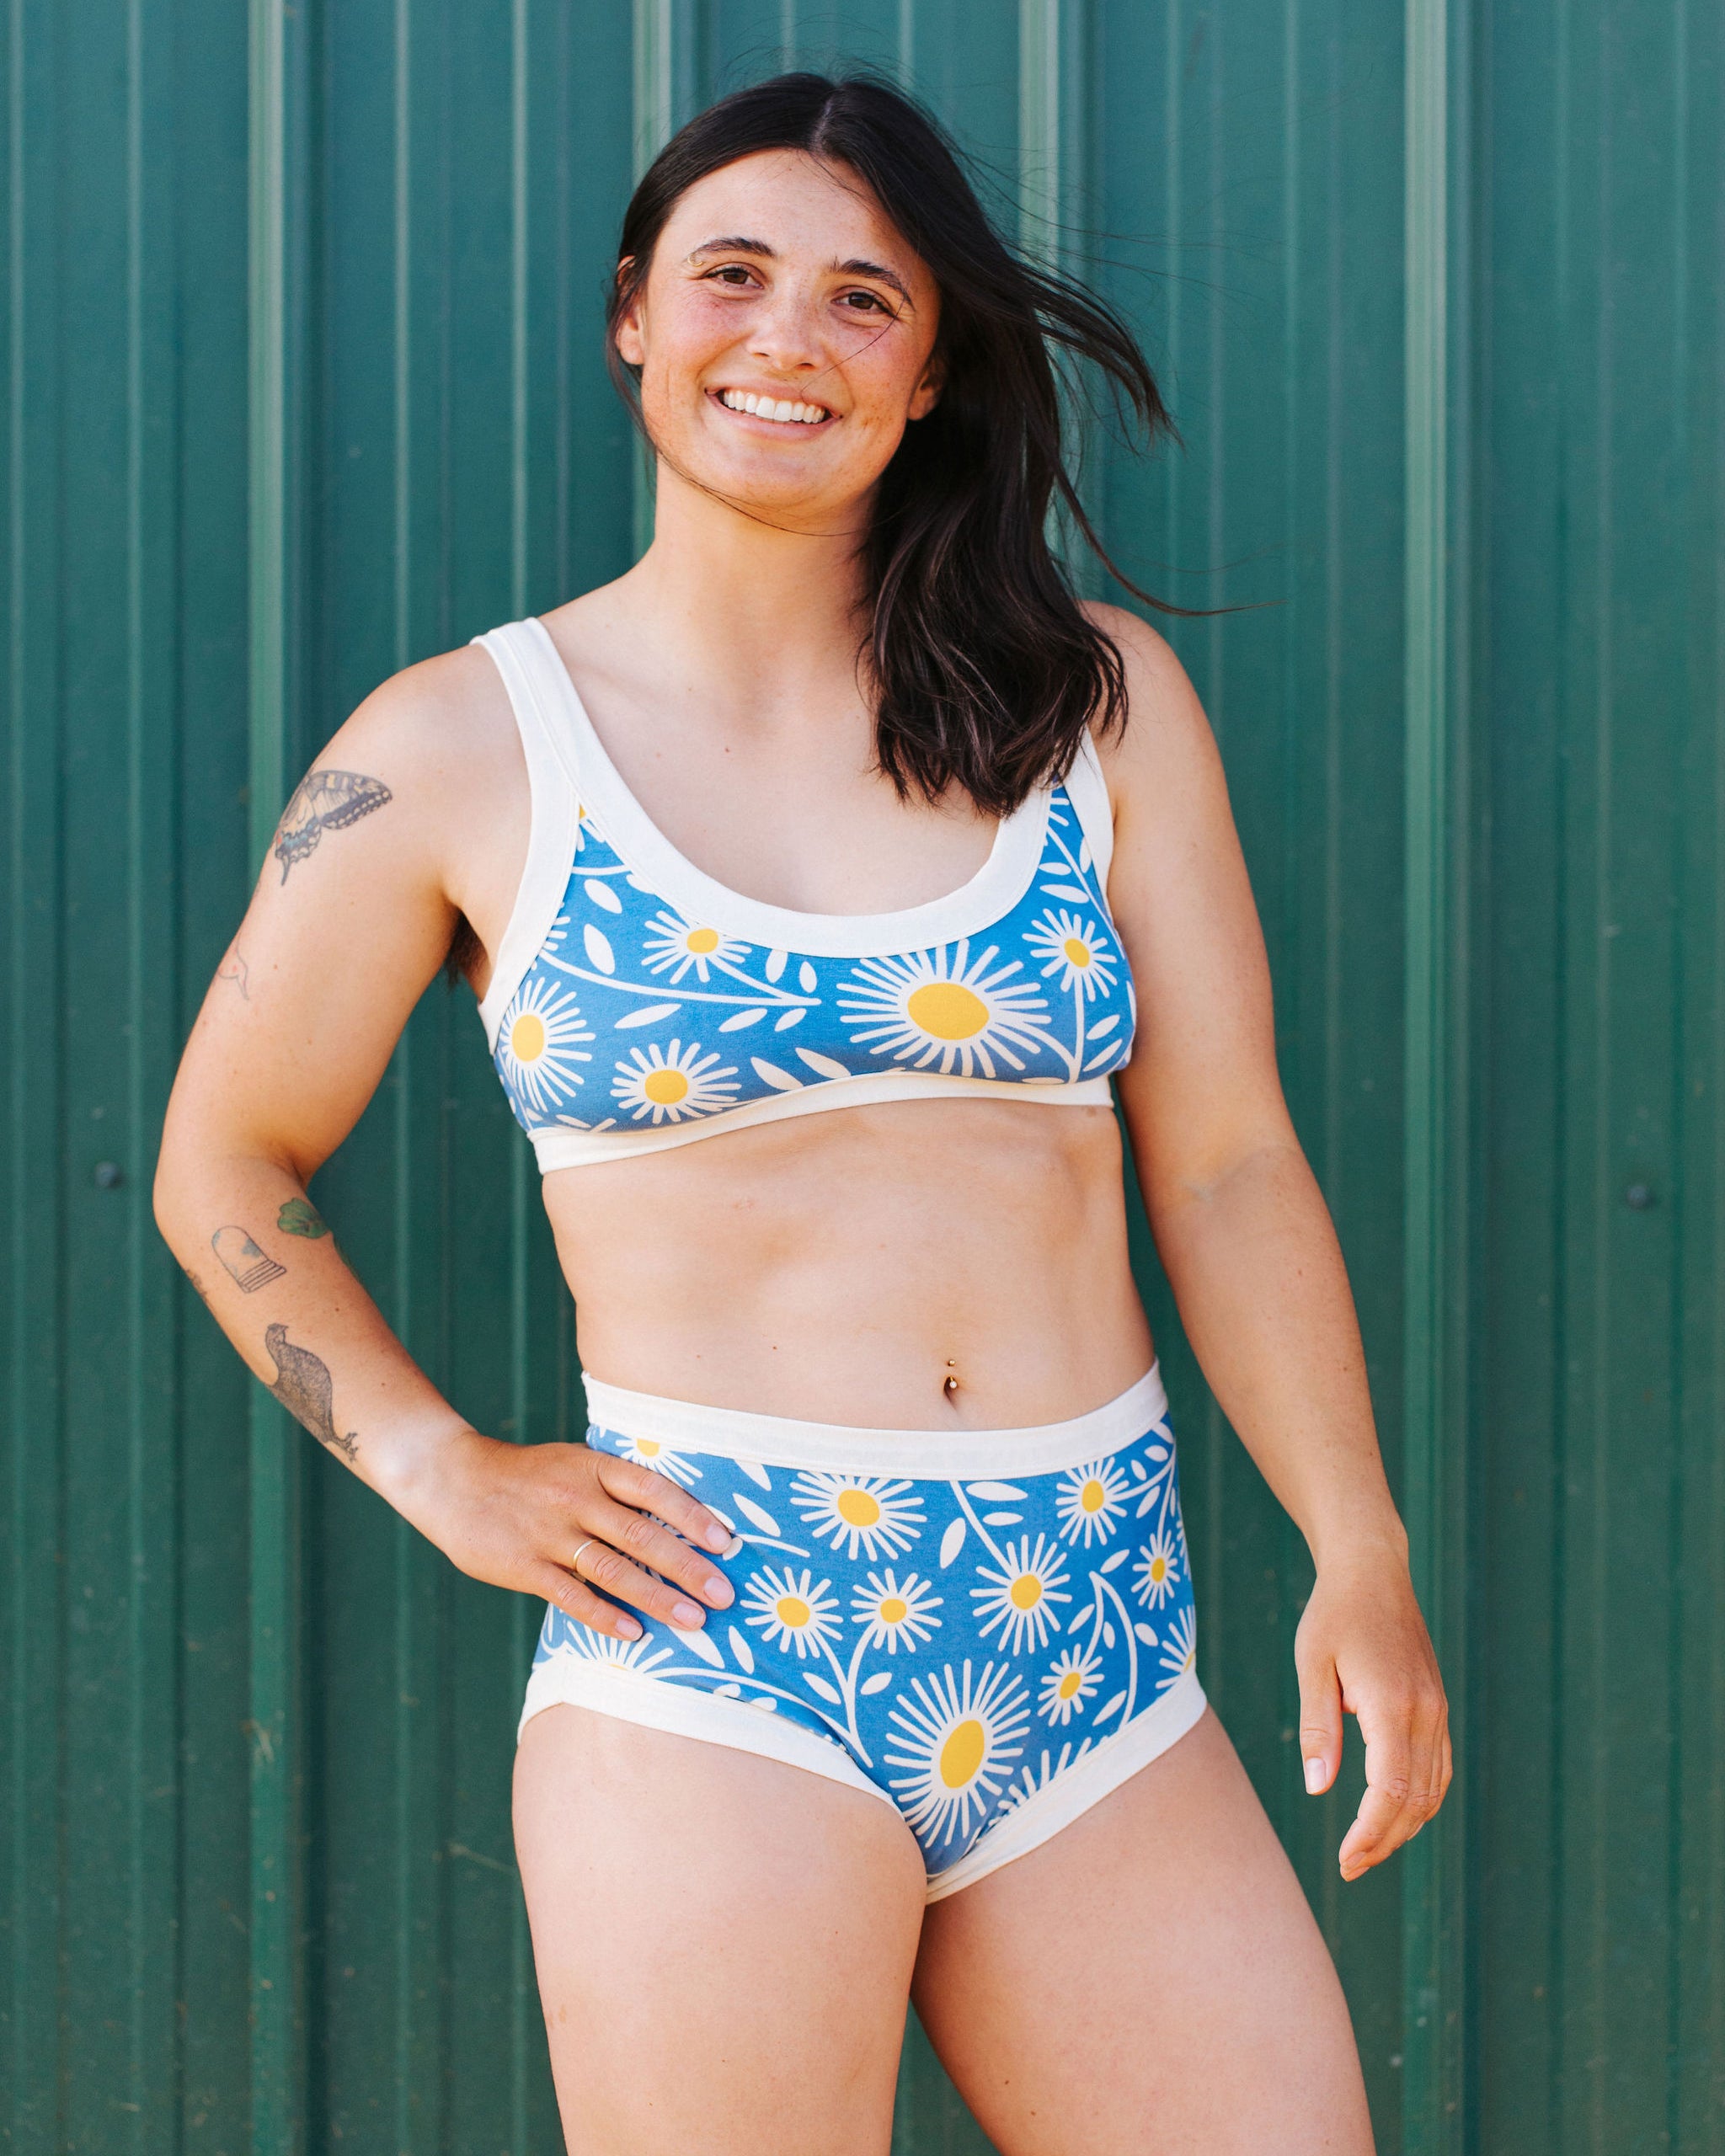 Model in front of a green wall wearing Thunderpants Original style underwear and Bralette in Daisy Days print: blue with white and yellow daisies.